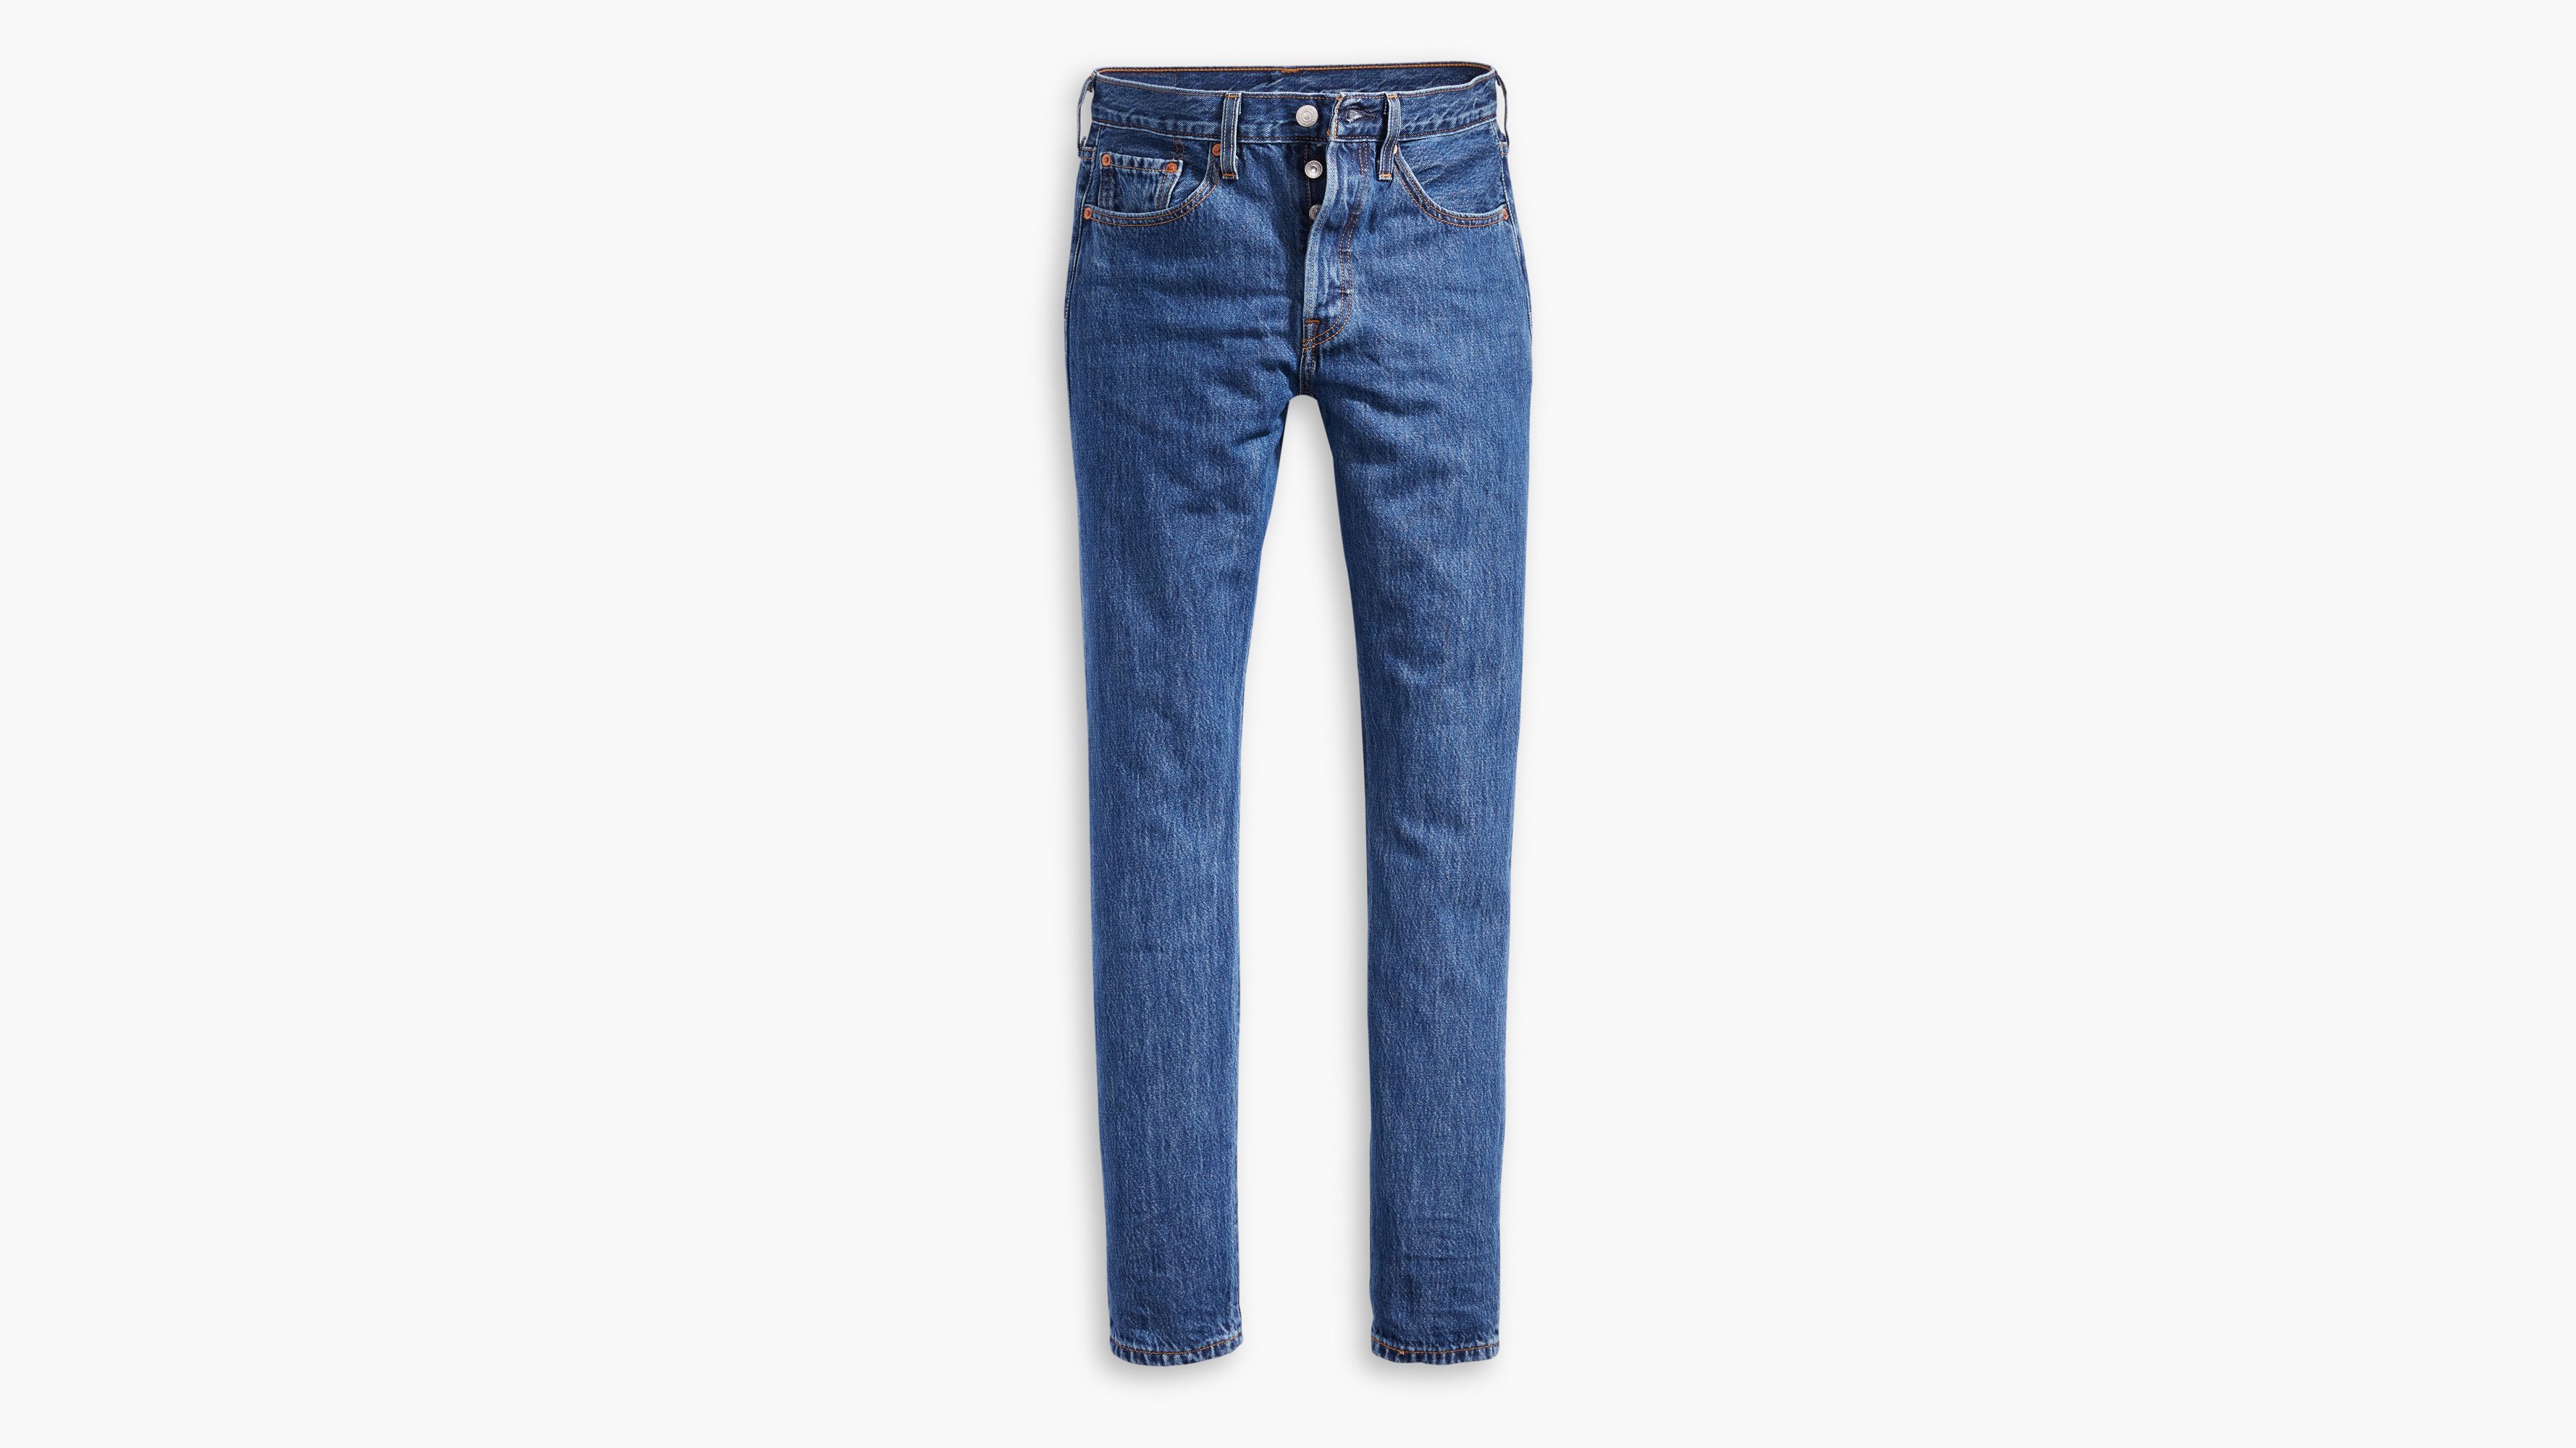 Levis Jeans Guide | Levi jeans women, Jeans outfit women, Straight jeans  outfit